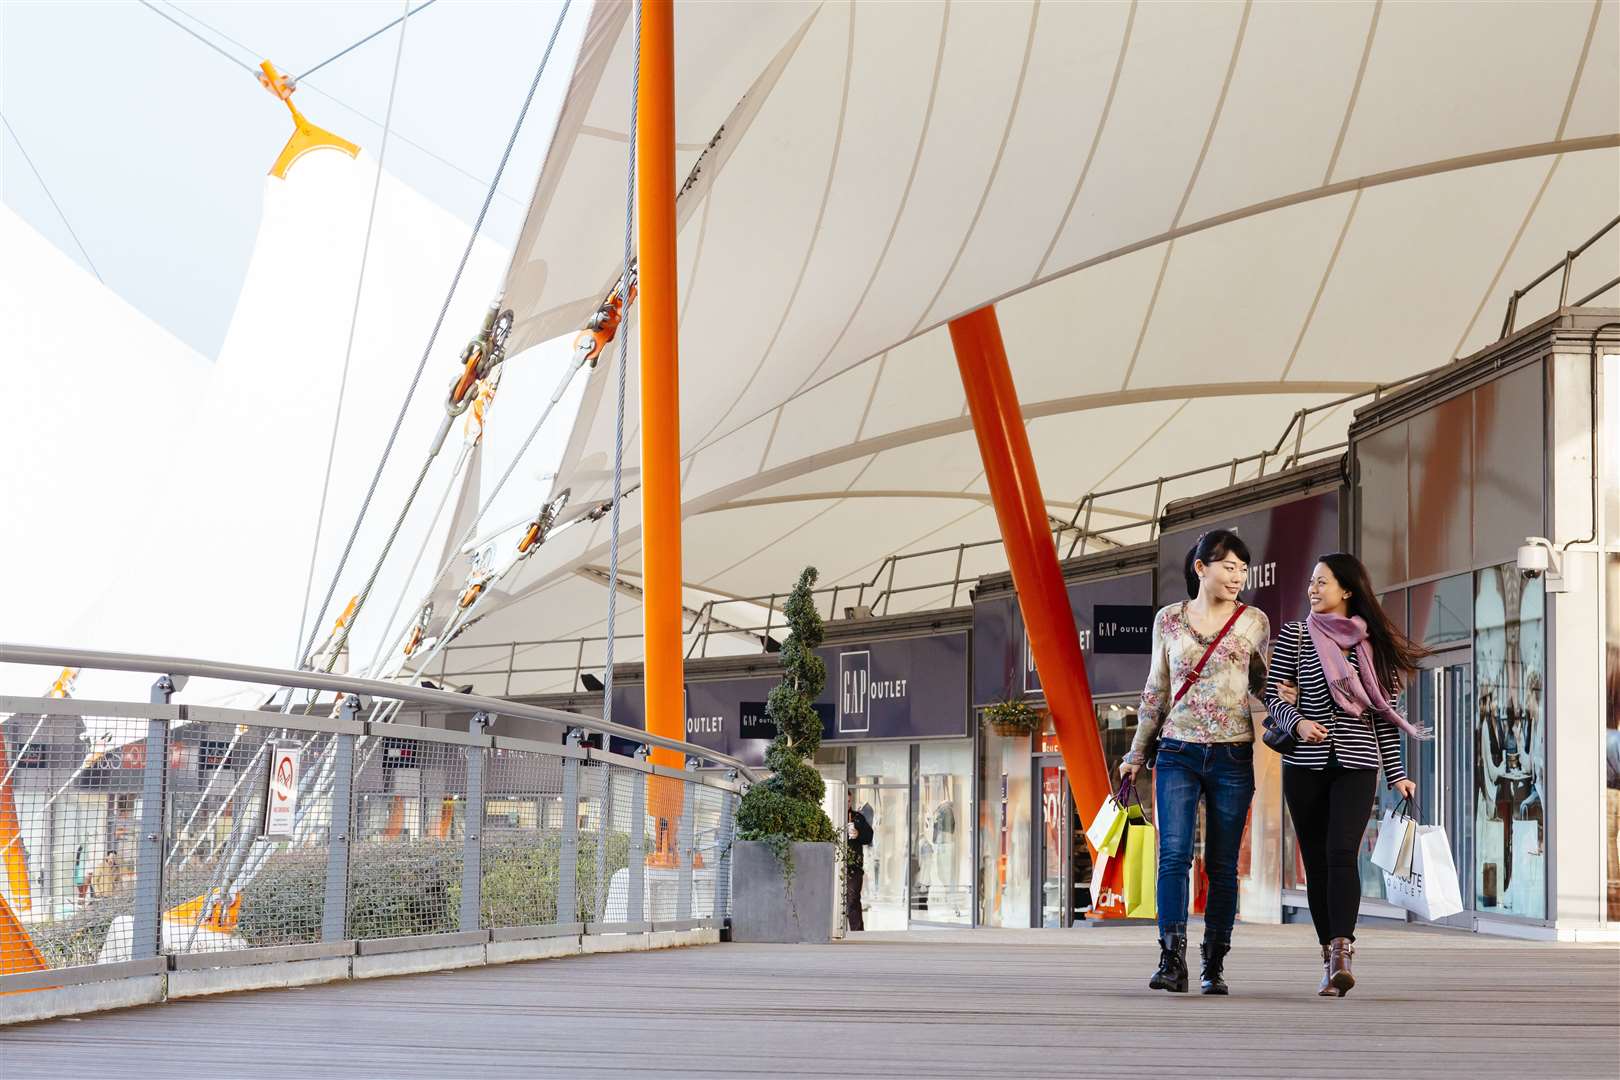 It is an exciting time at the Ashford Designer Outlet